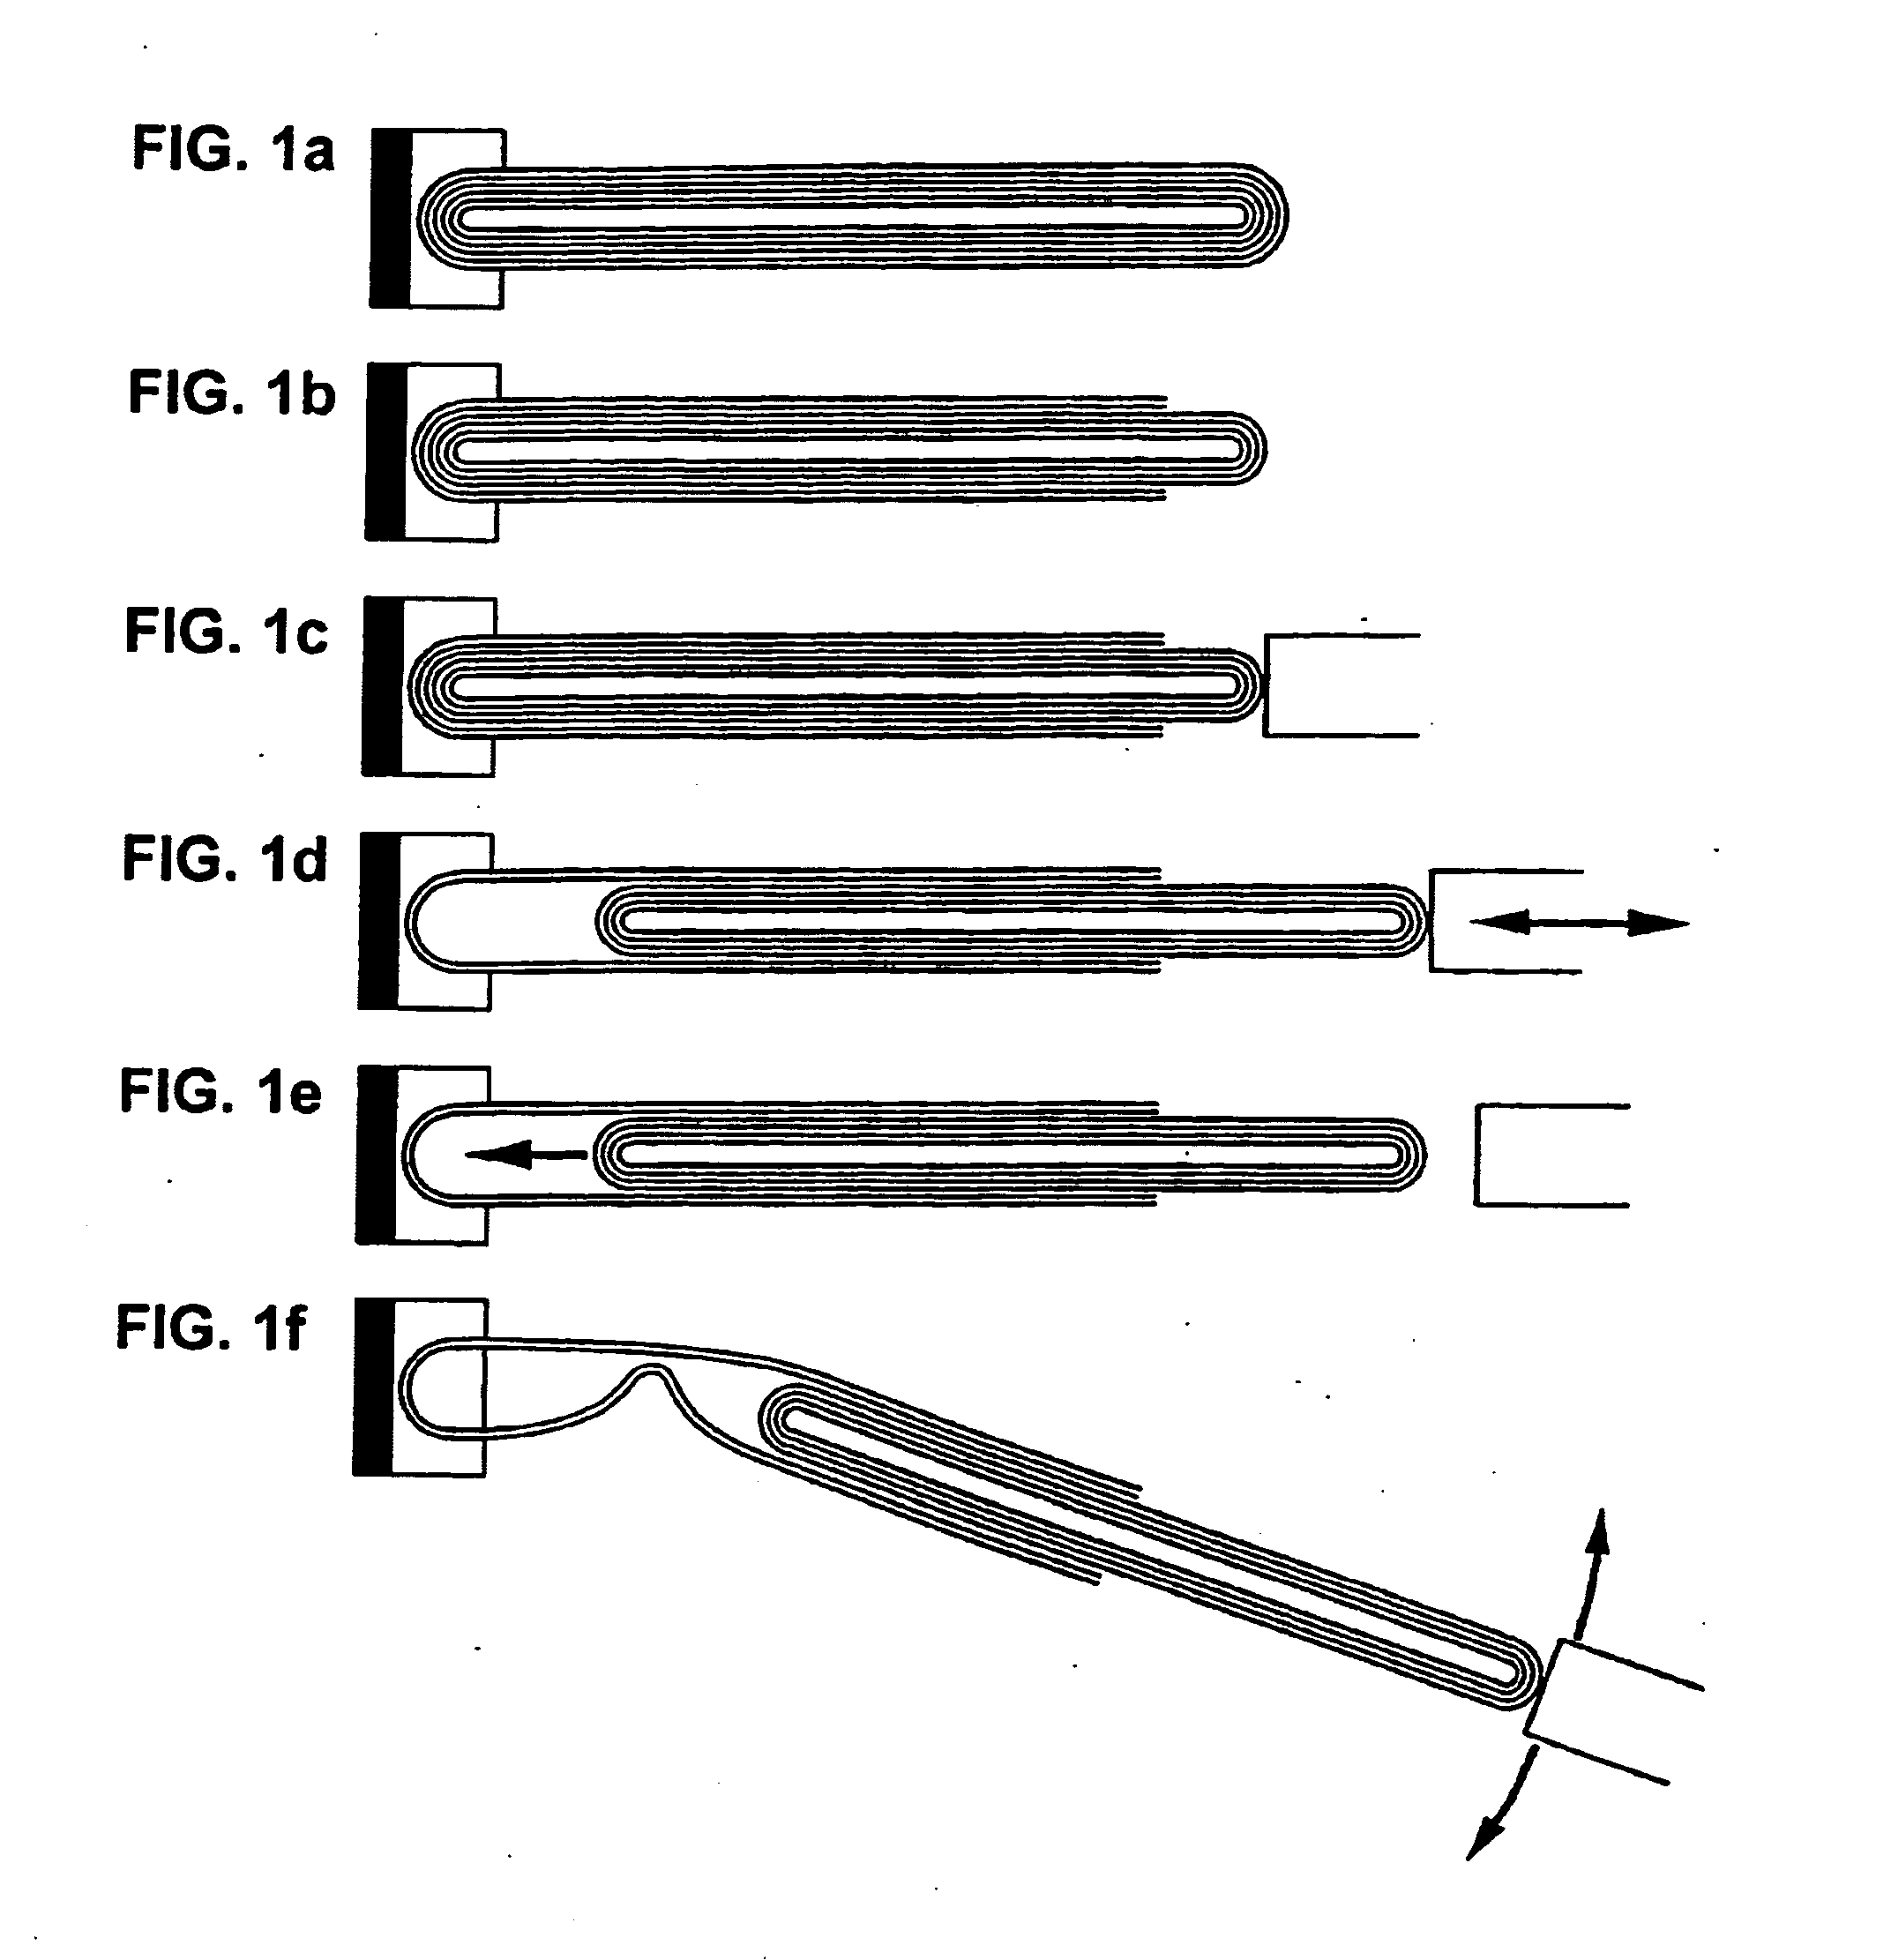 Telescoped multiwall nanotube and manufacture thereof